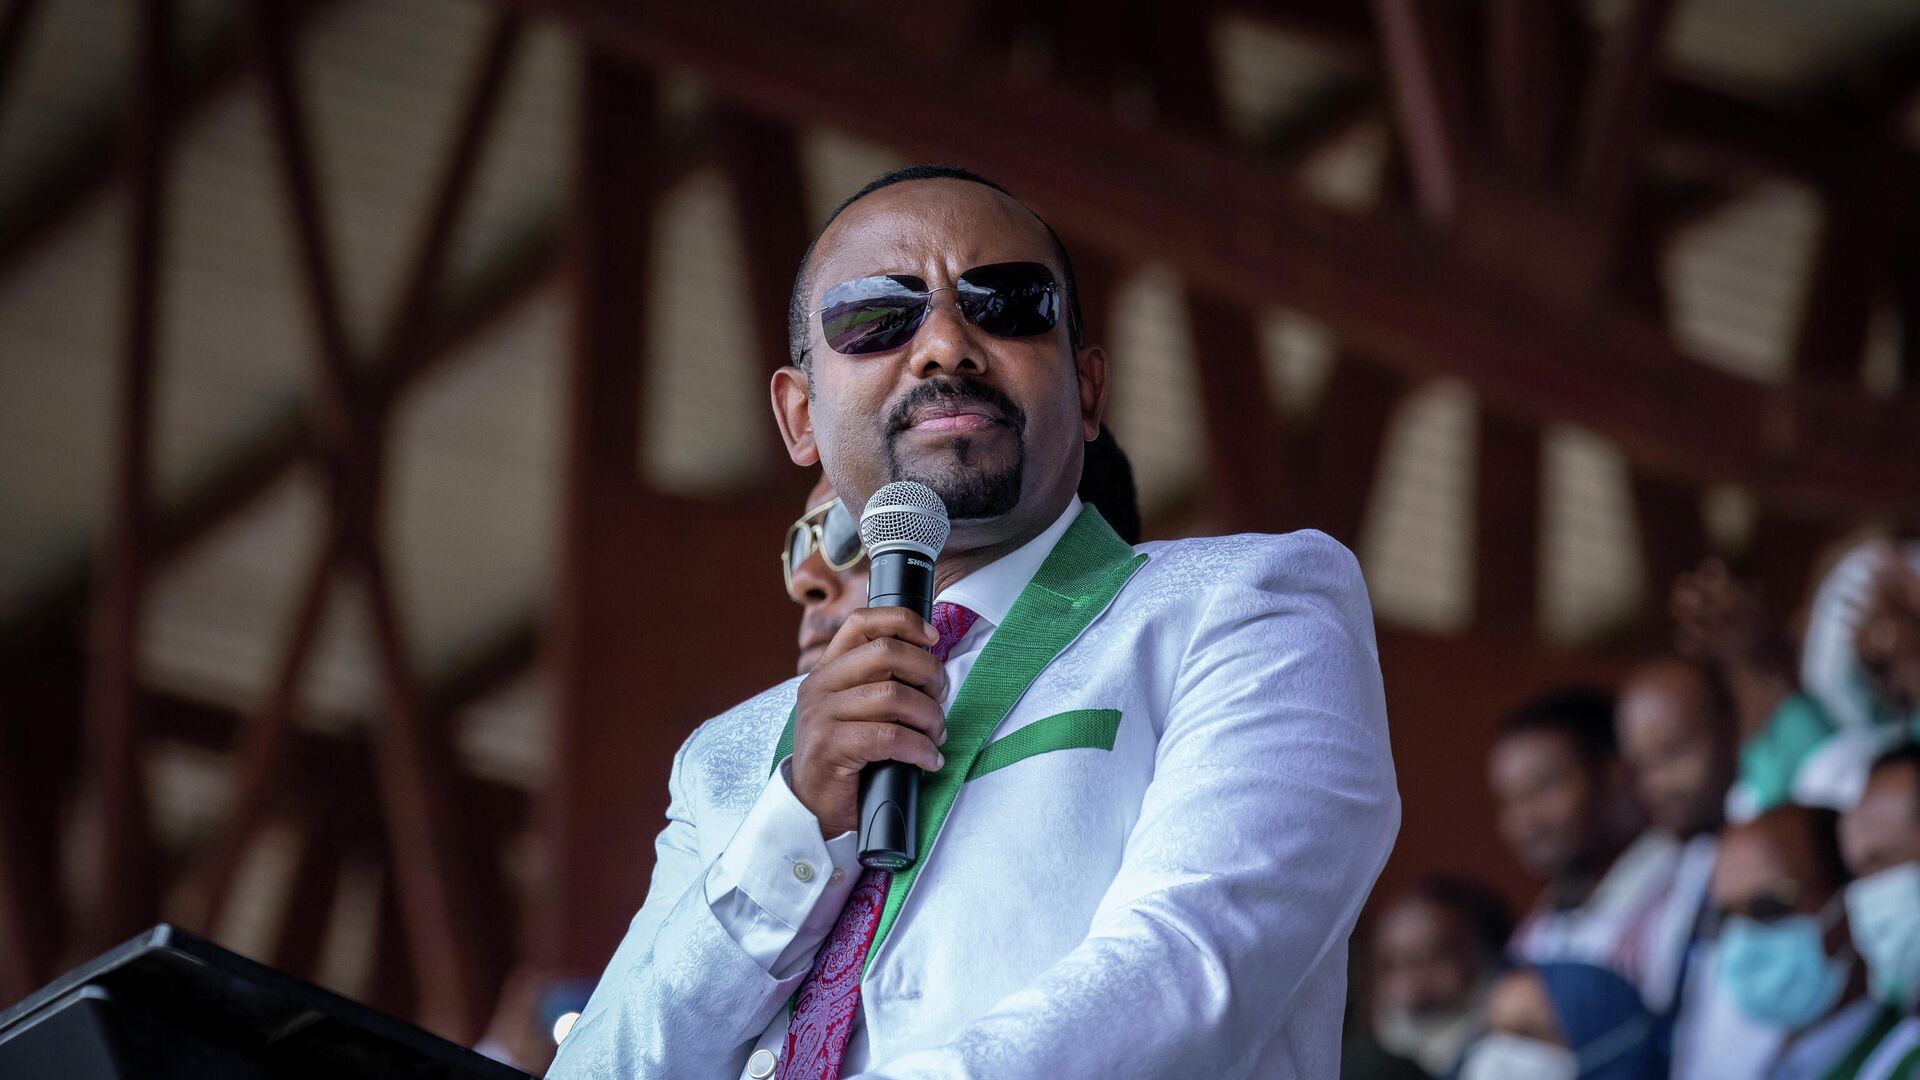 In this Wednesday, June 16, 2021 file photo, Ethiopia's Prime Minister Abiy Ahmed speaks at a final campaign rally at a stadium in the town of Jimma in the southwestern Oromia Region of Ethiopia. Ethiopia's Prime Minister Abiy Ahmed has been sworn in Monday, Oct. 4, 2021 for a second five-year term. - Sputnik International, 1920, 22.11.2021